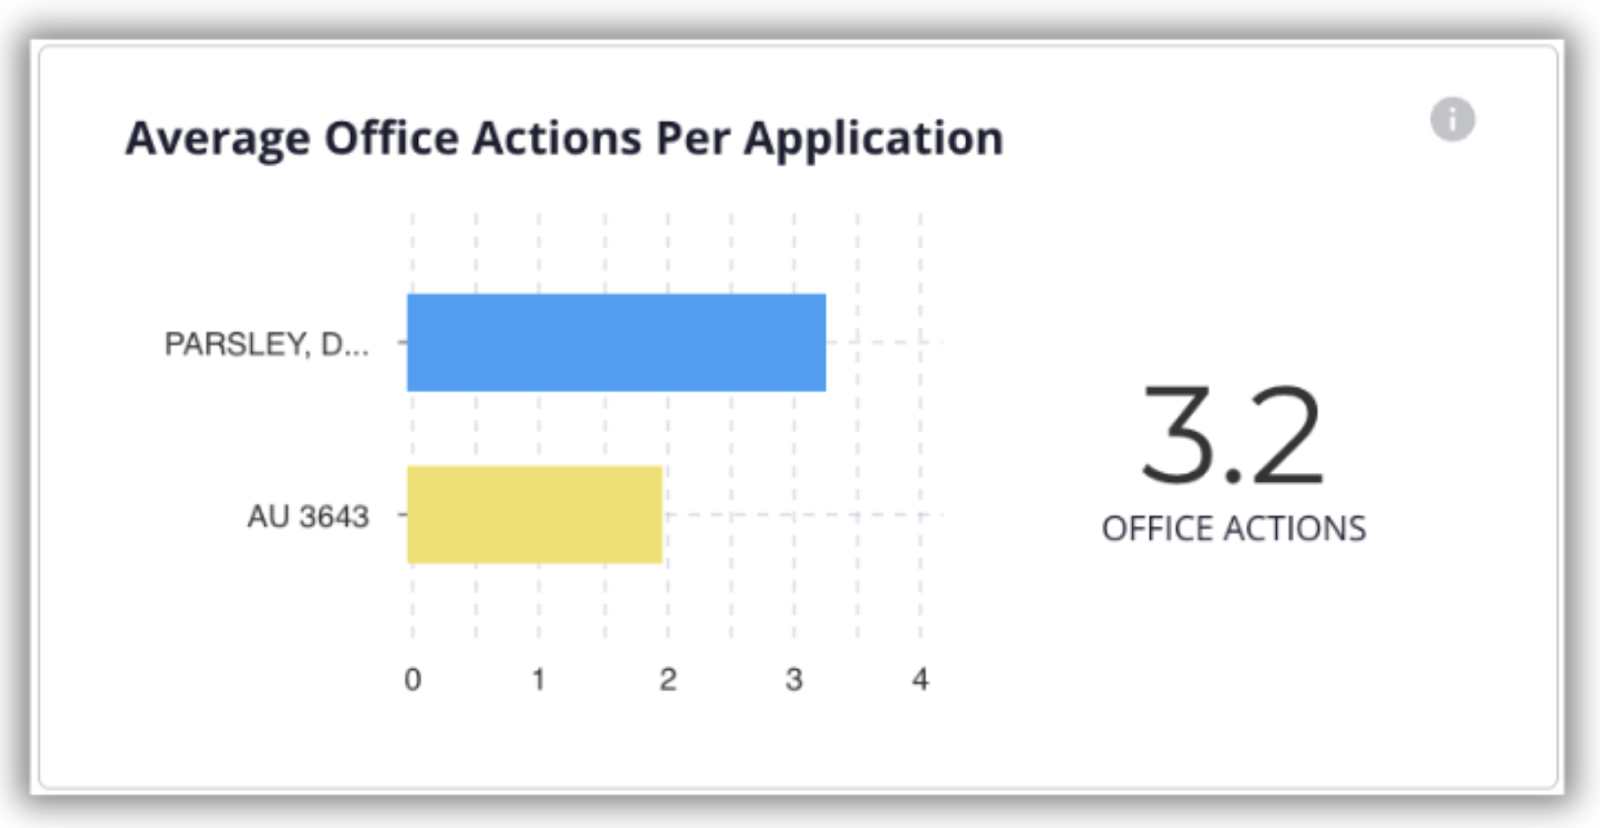 USPTO average office actions per application